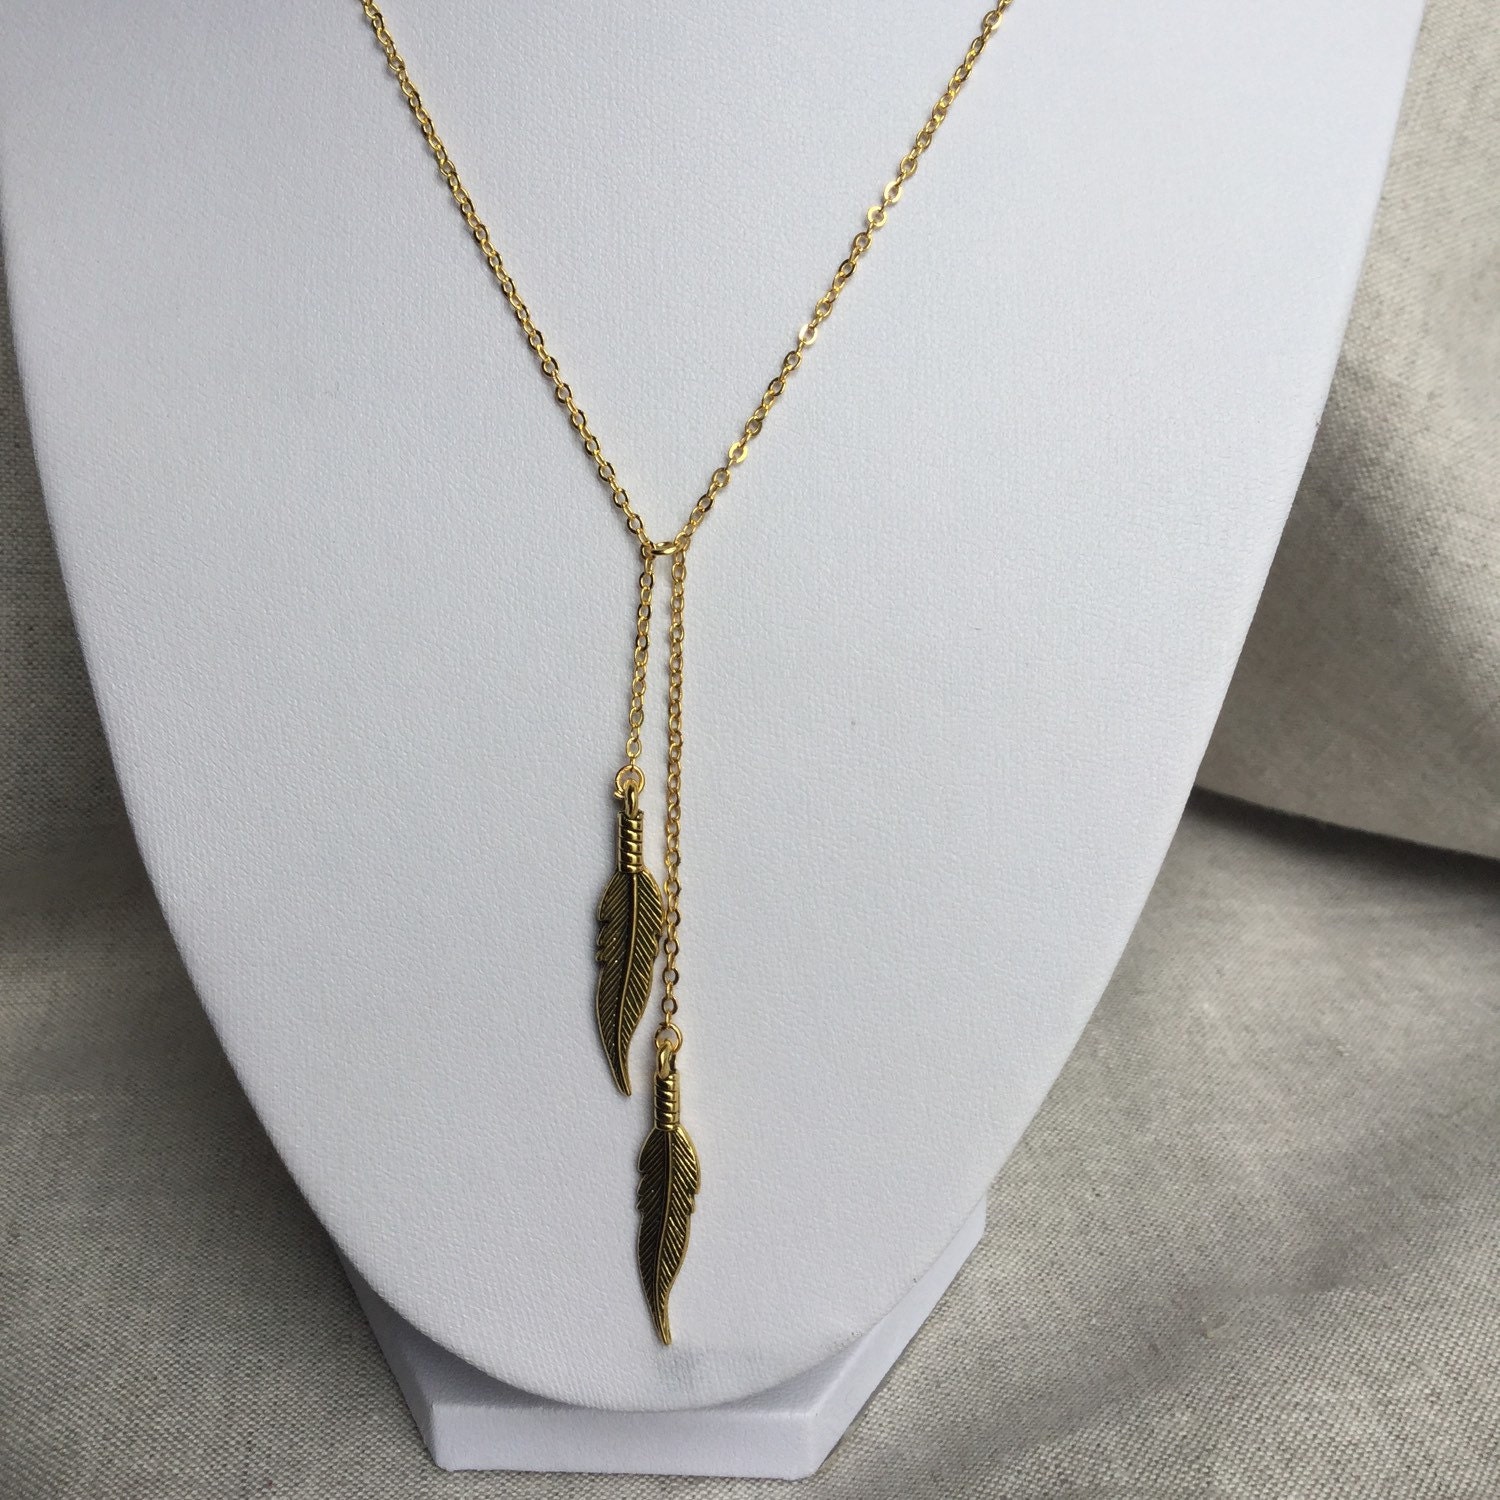 2 Feather Necklace Gold Feather Necklace Dainty gold